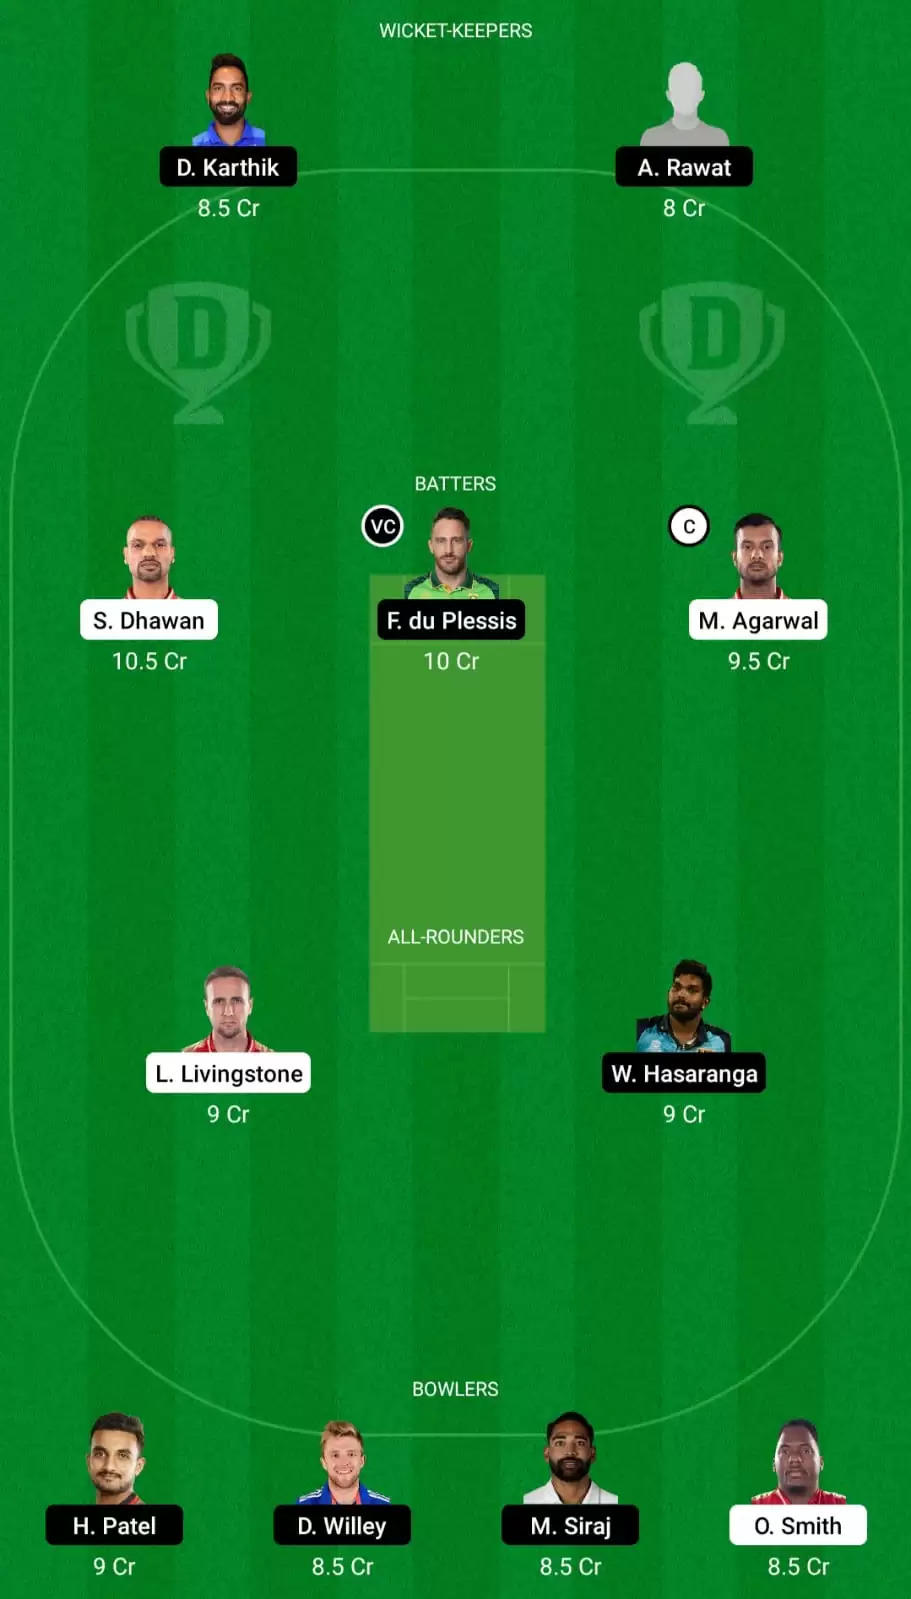 PBKS vs RCB Dream11 Prediction, Fantasy Cricket Tips, Dream11 Team, Playing XI, Pitch Report, Injury And Weather Updates – Punjab Kings vs Royal Challengers Bangalore, IPL 2022, Match – 3